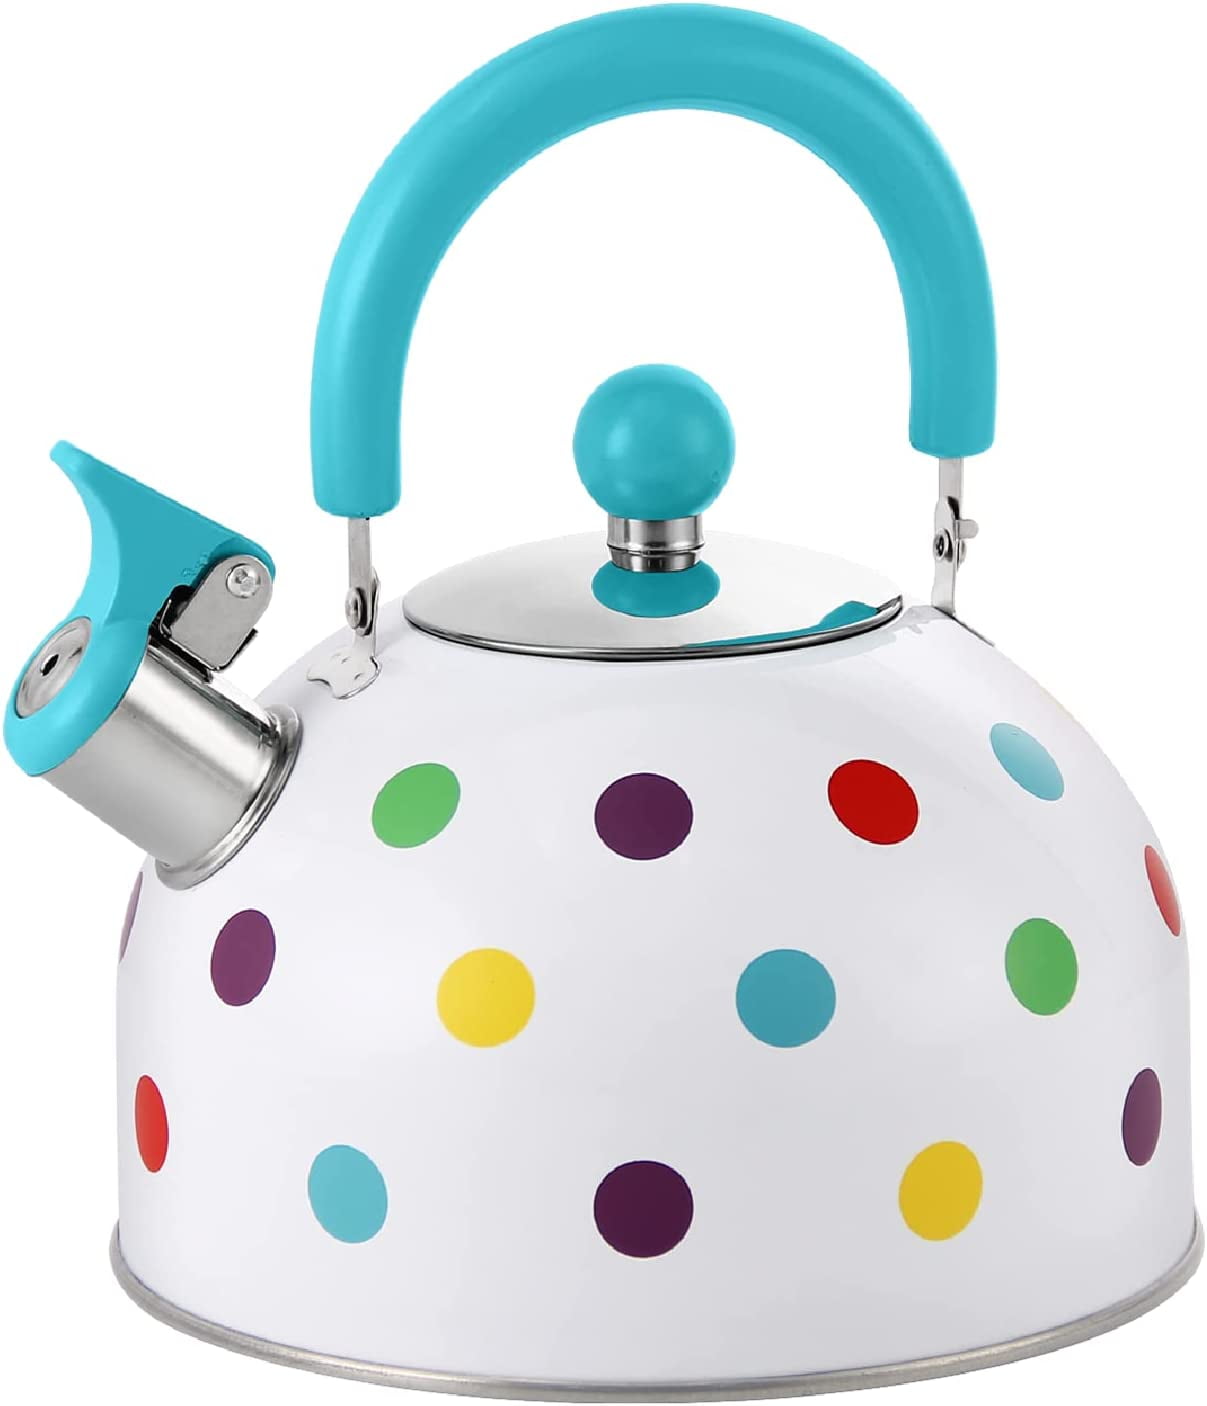 H Haus Roland Tea Kettle Stovetop Whistling Colorful Polka Dots Kettle